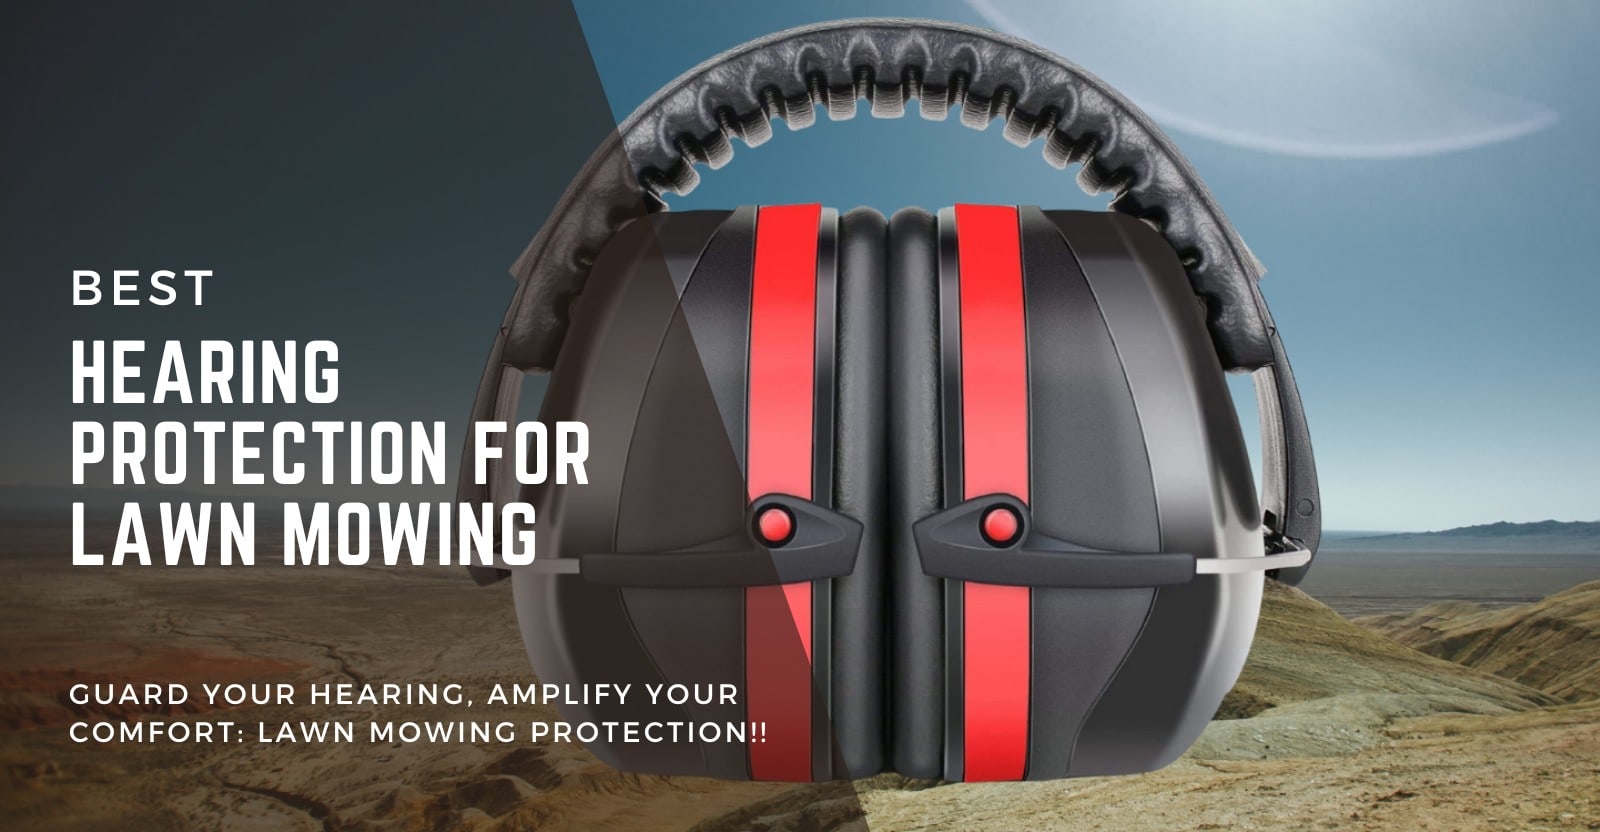 Best Hearing Protection For Lawn Mowing Review